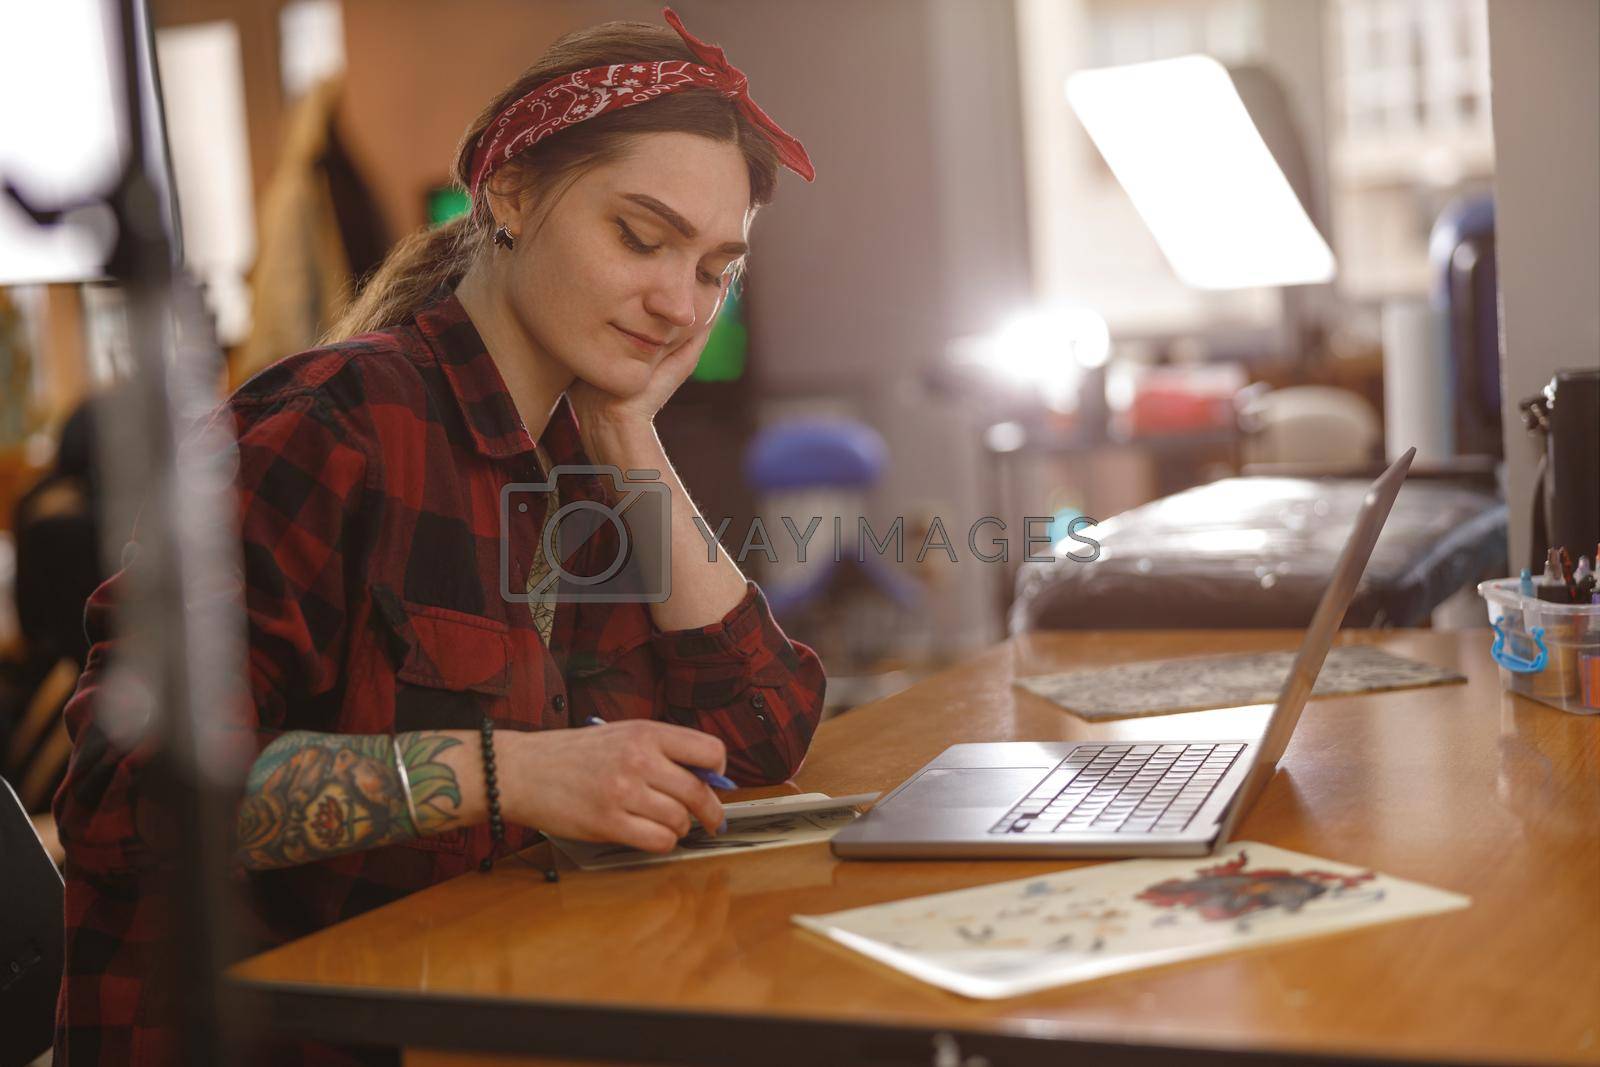 Royalty free image of Tattoo artist in plaid shirt making sketches, working on new pattern by Yaroslav_astakhov